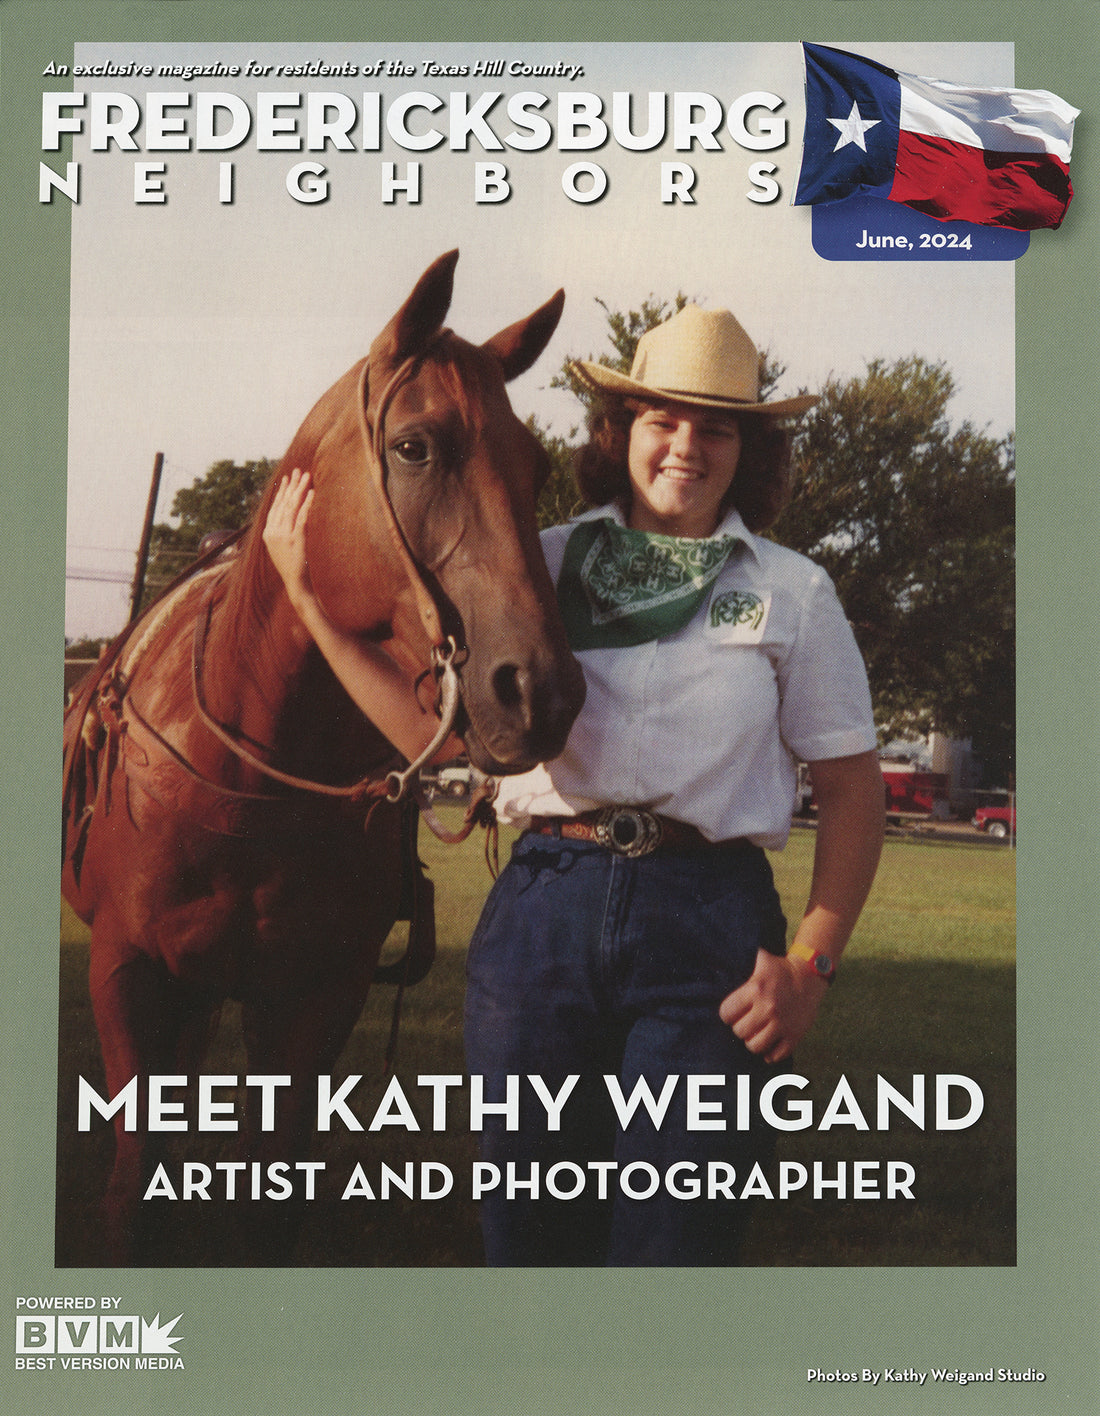 Artists Kathy Weigand & Pam Bunch Featured